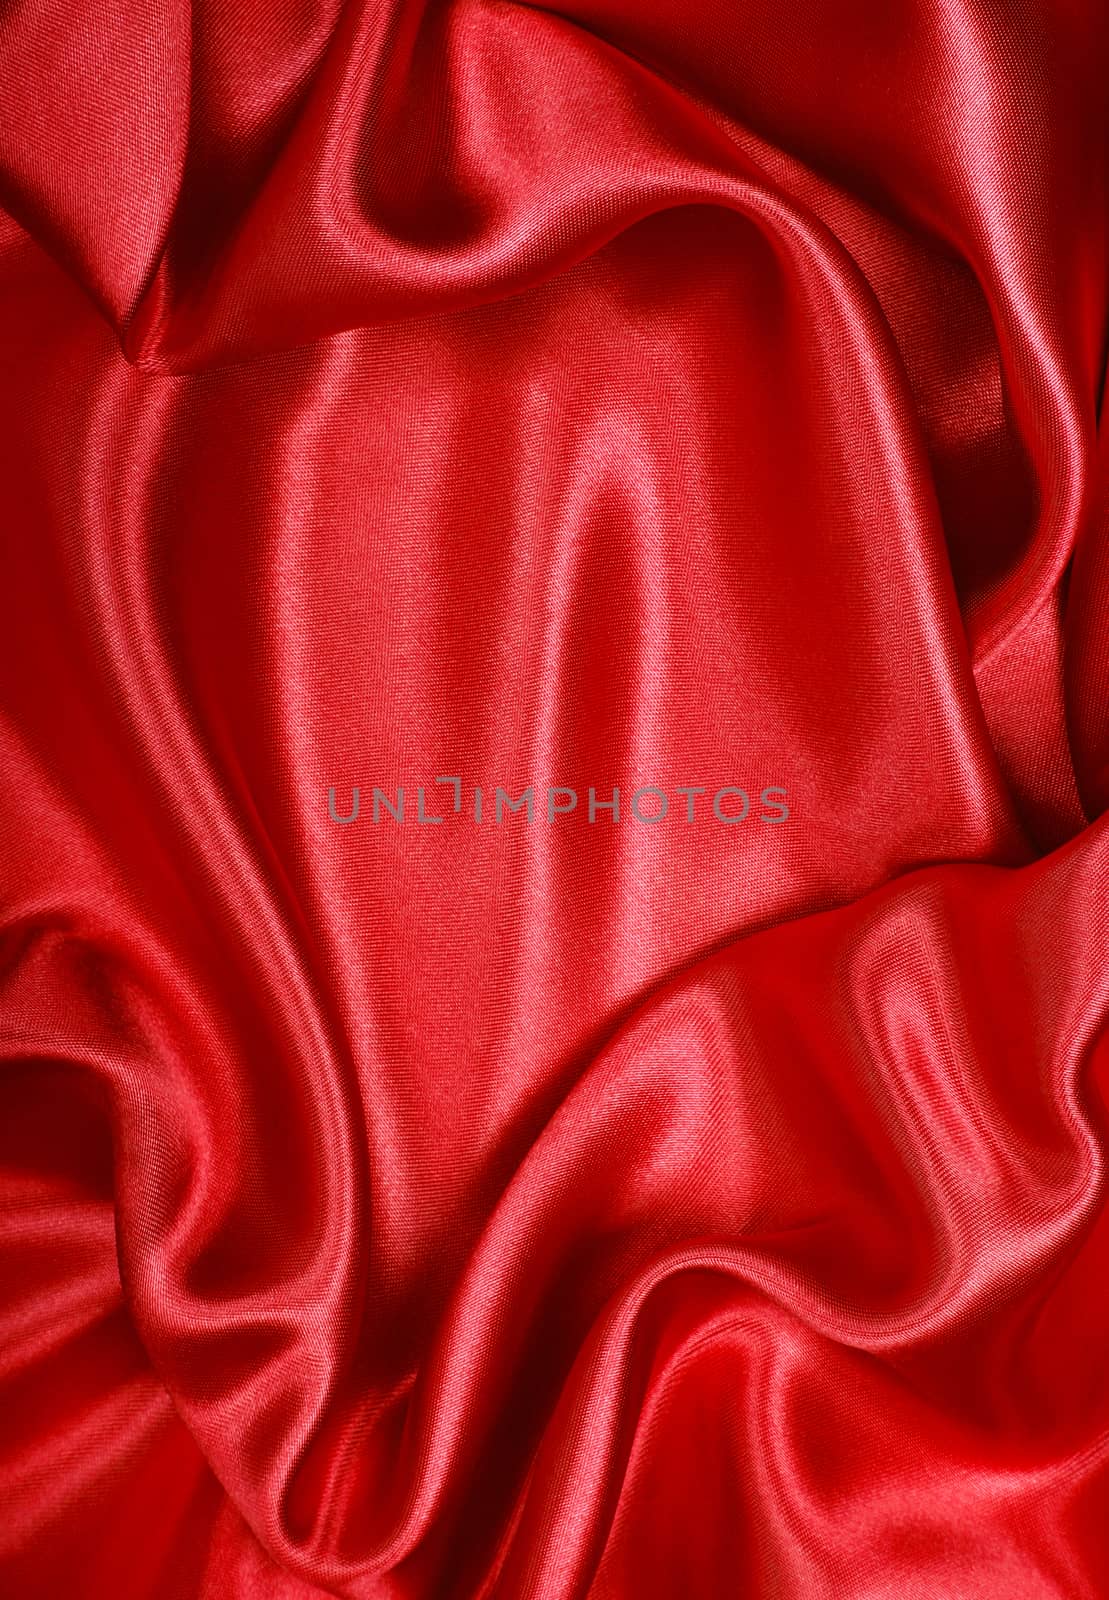 Smooth elegant red silk can use as background  by oxanatravel